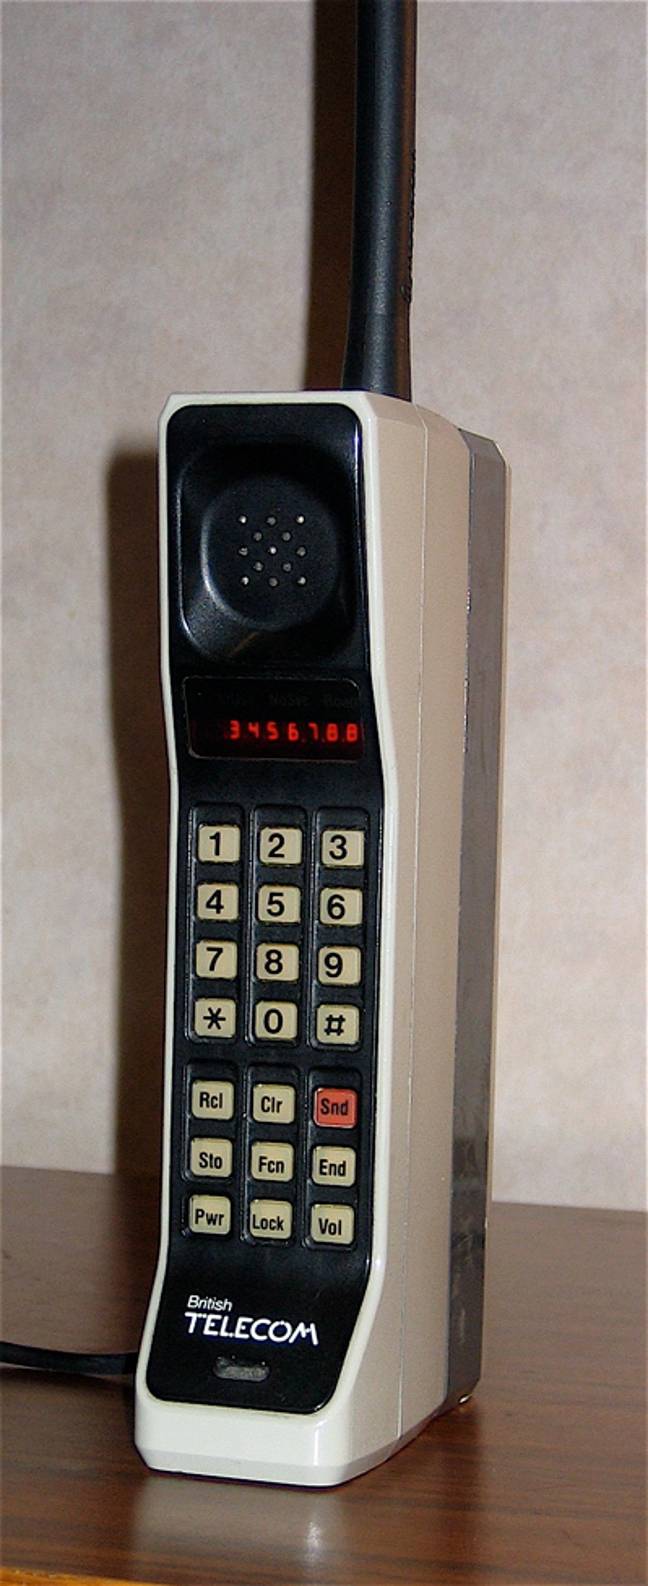 The iconic Motorola DynaTAC 8000X from 1984 could be worth up to £3,500. Credit: Wikimedia Commons/Redrum0486